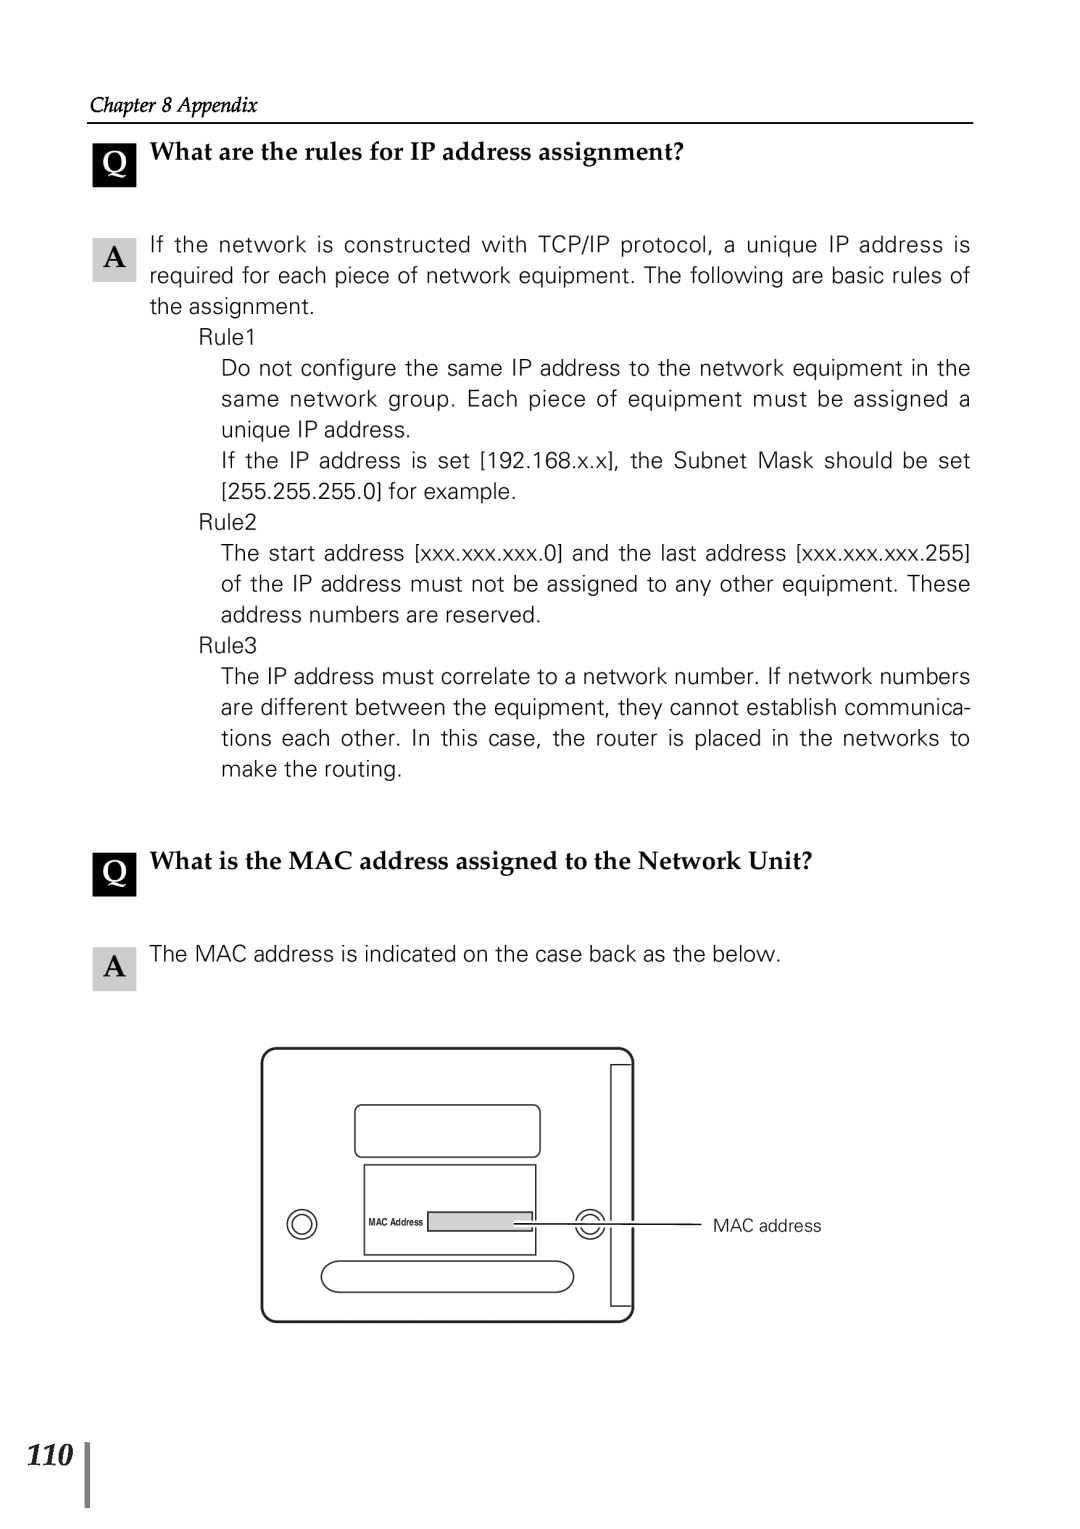 Sanyo POA-PN02 Q What are the rules for IP address assignment?, Q What is the MAC address assigned to the Network Unit? 